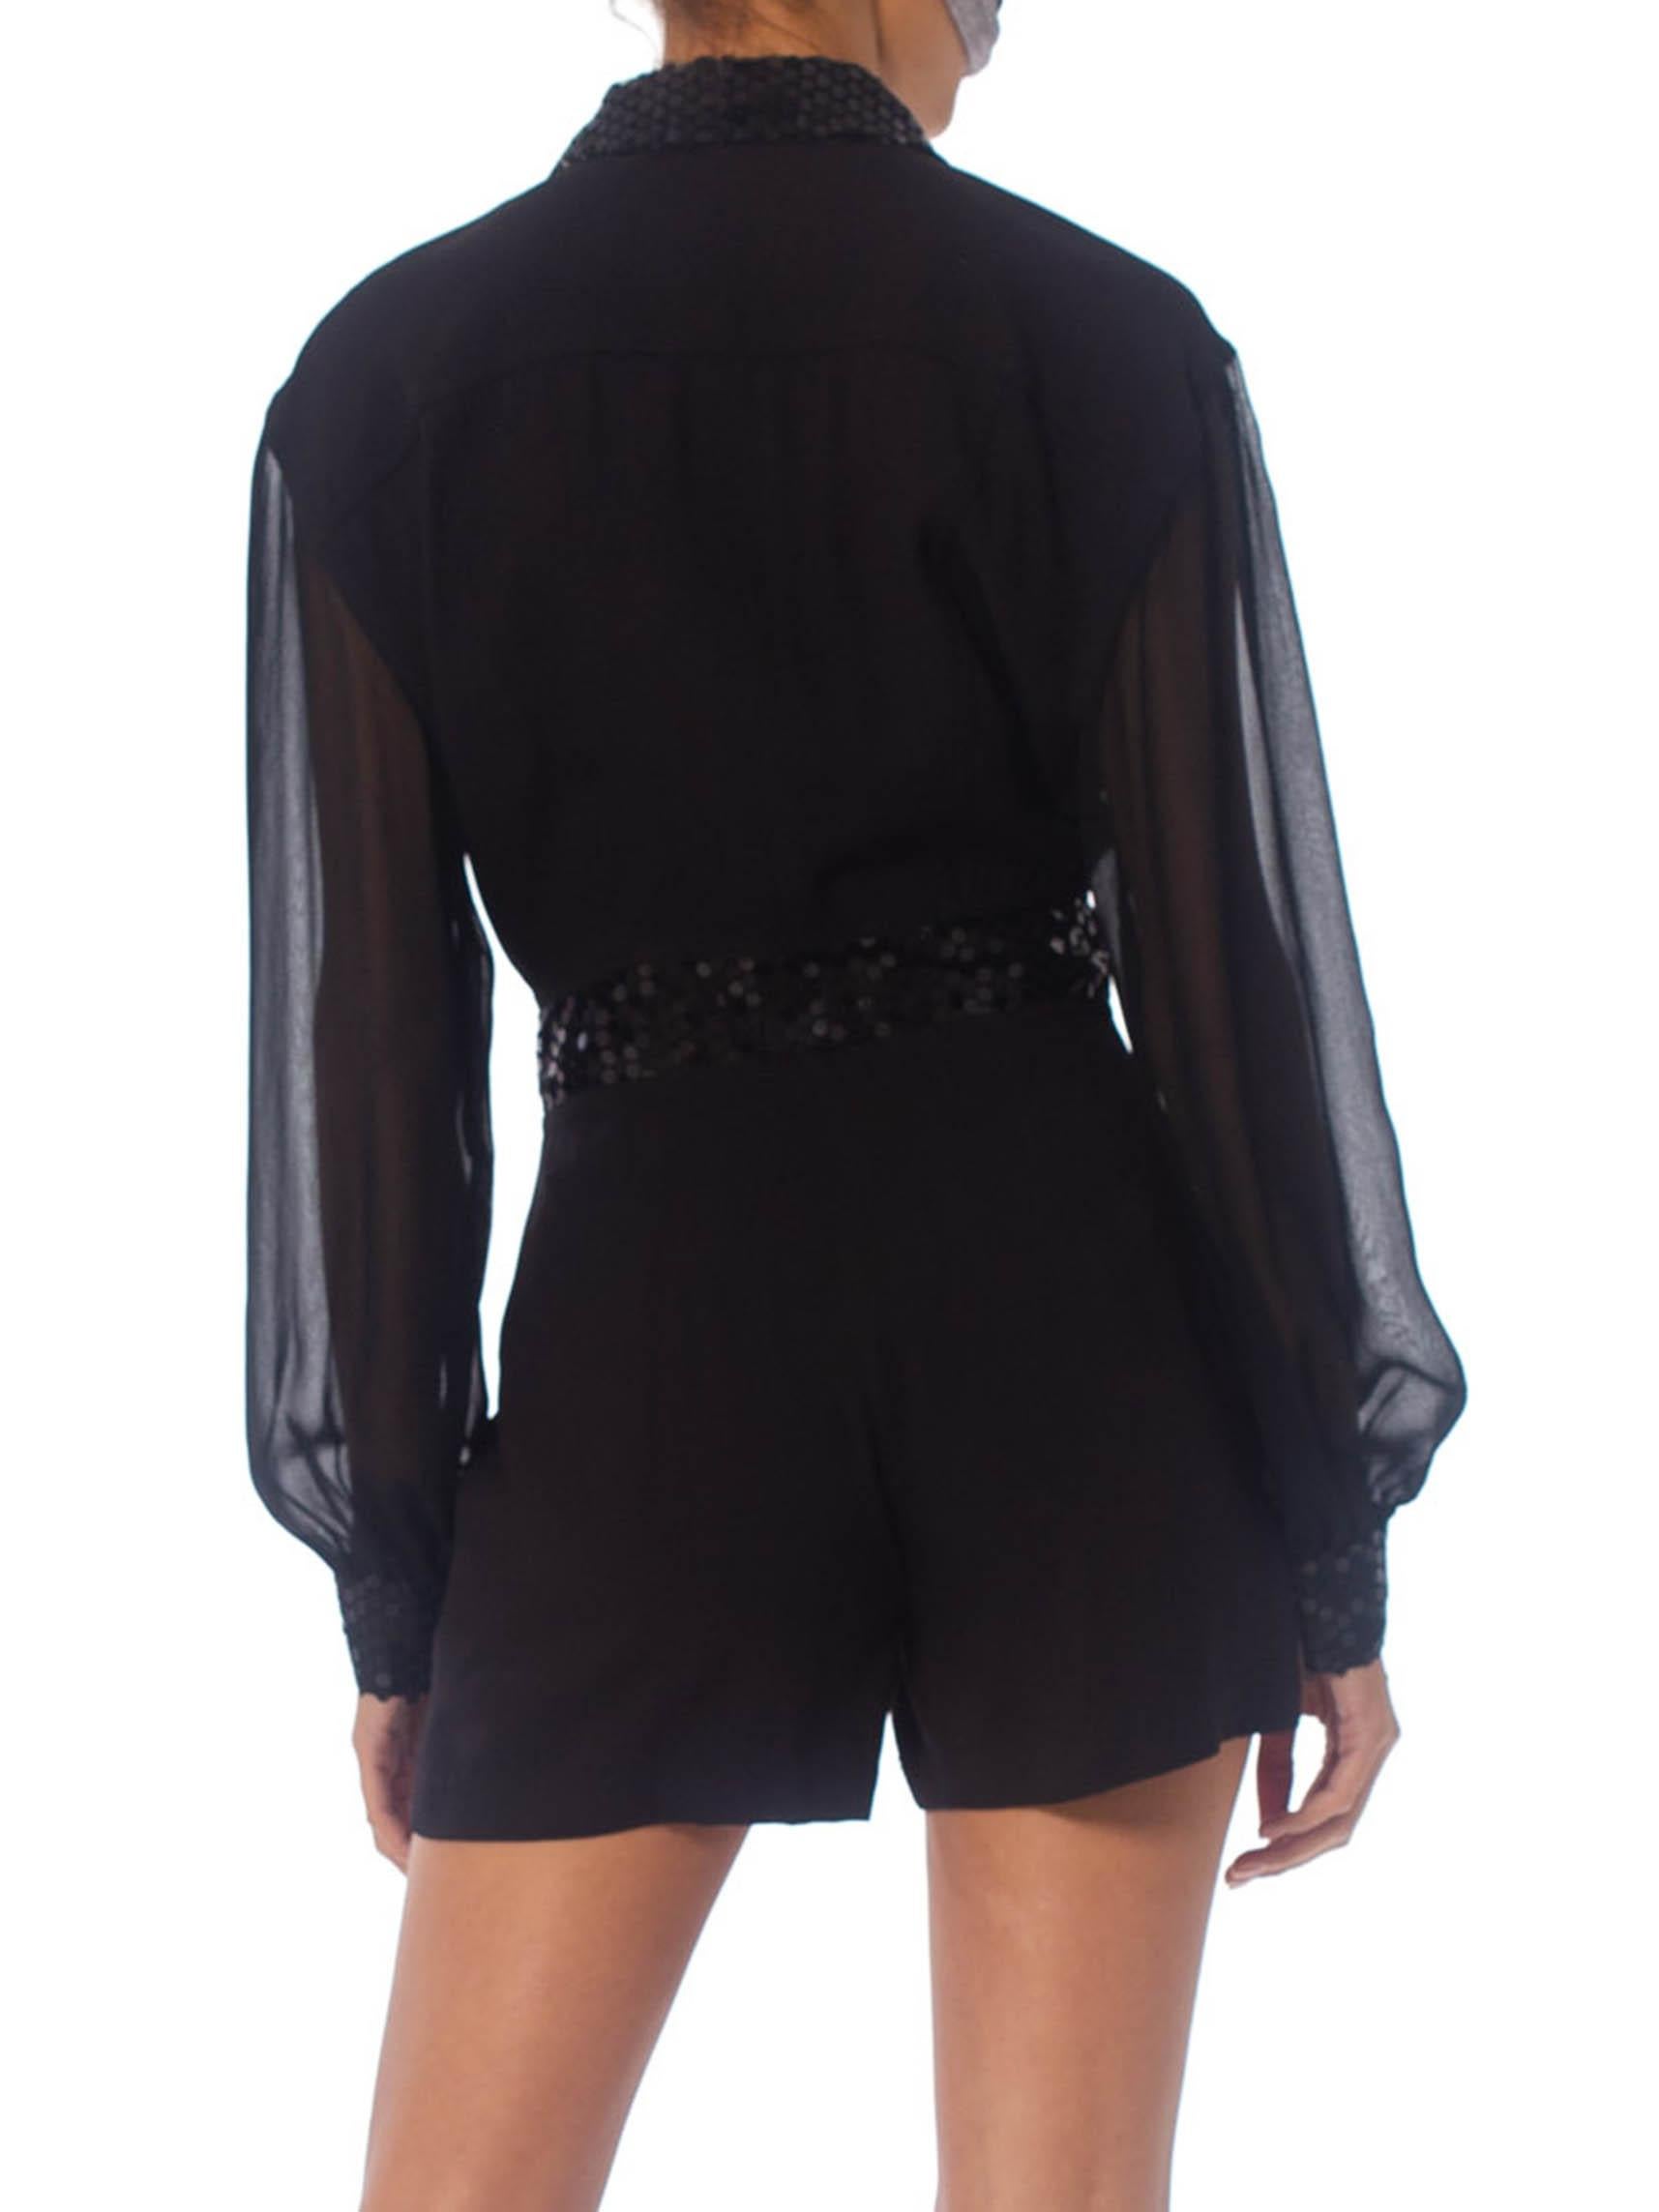 Black 1980S Disco Sequin Shorts With Sheer Chiffon Sleeves  Romper